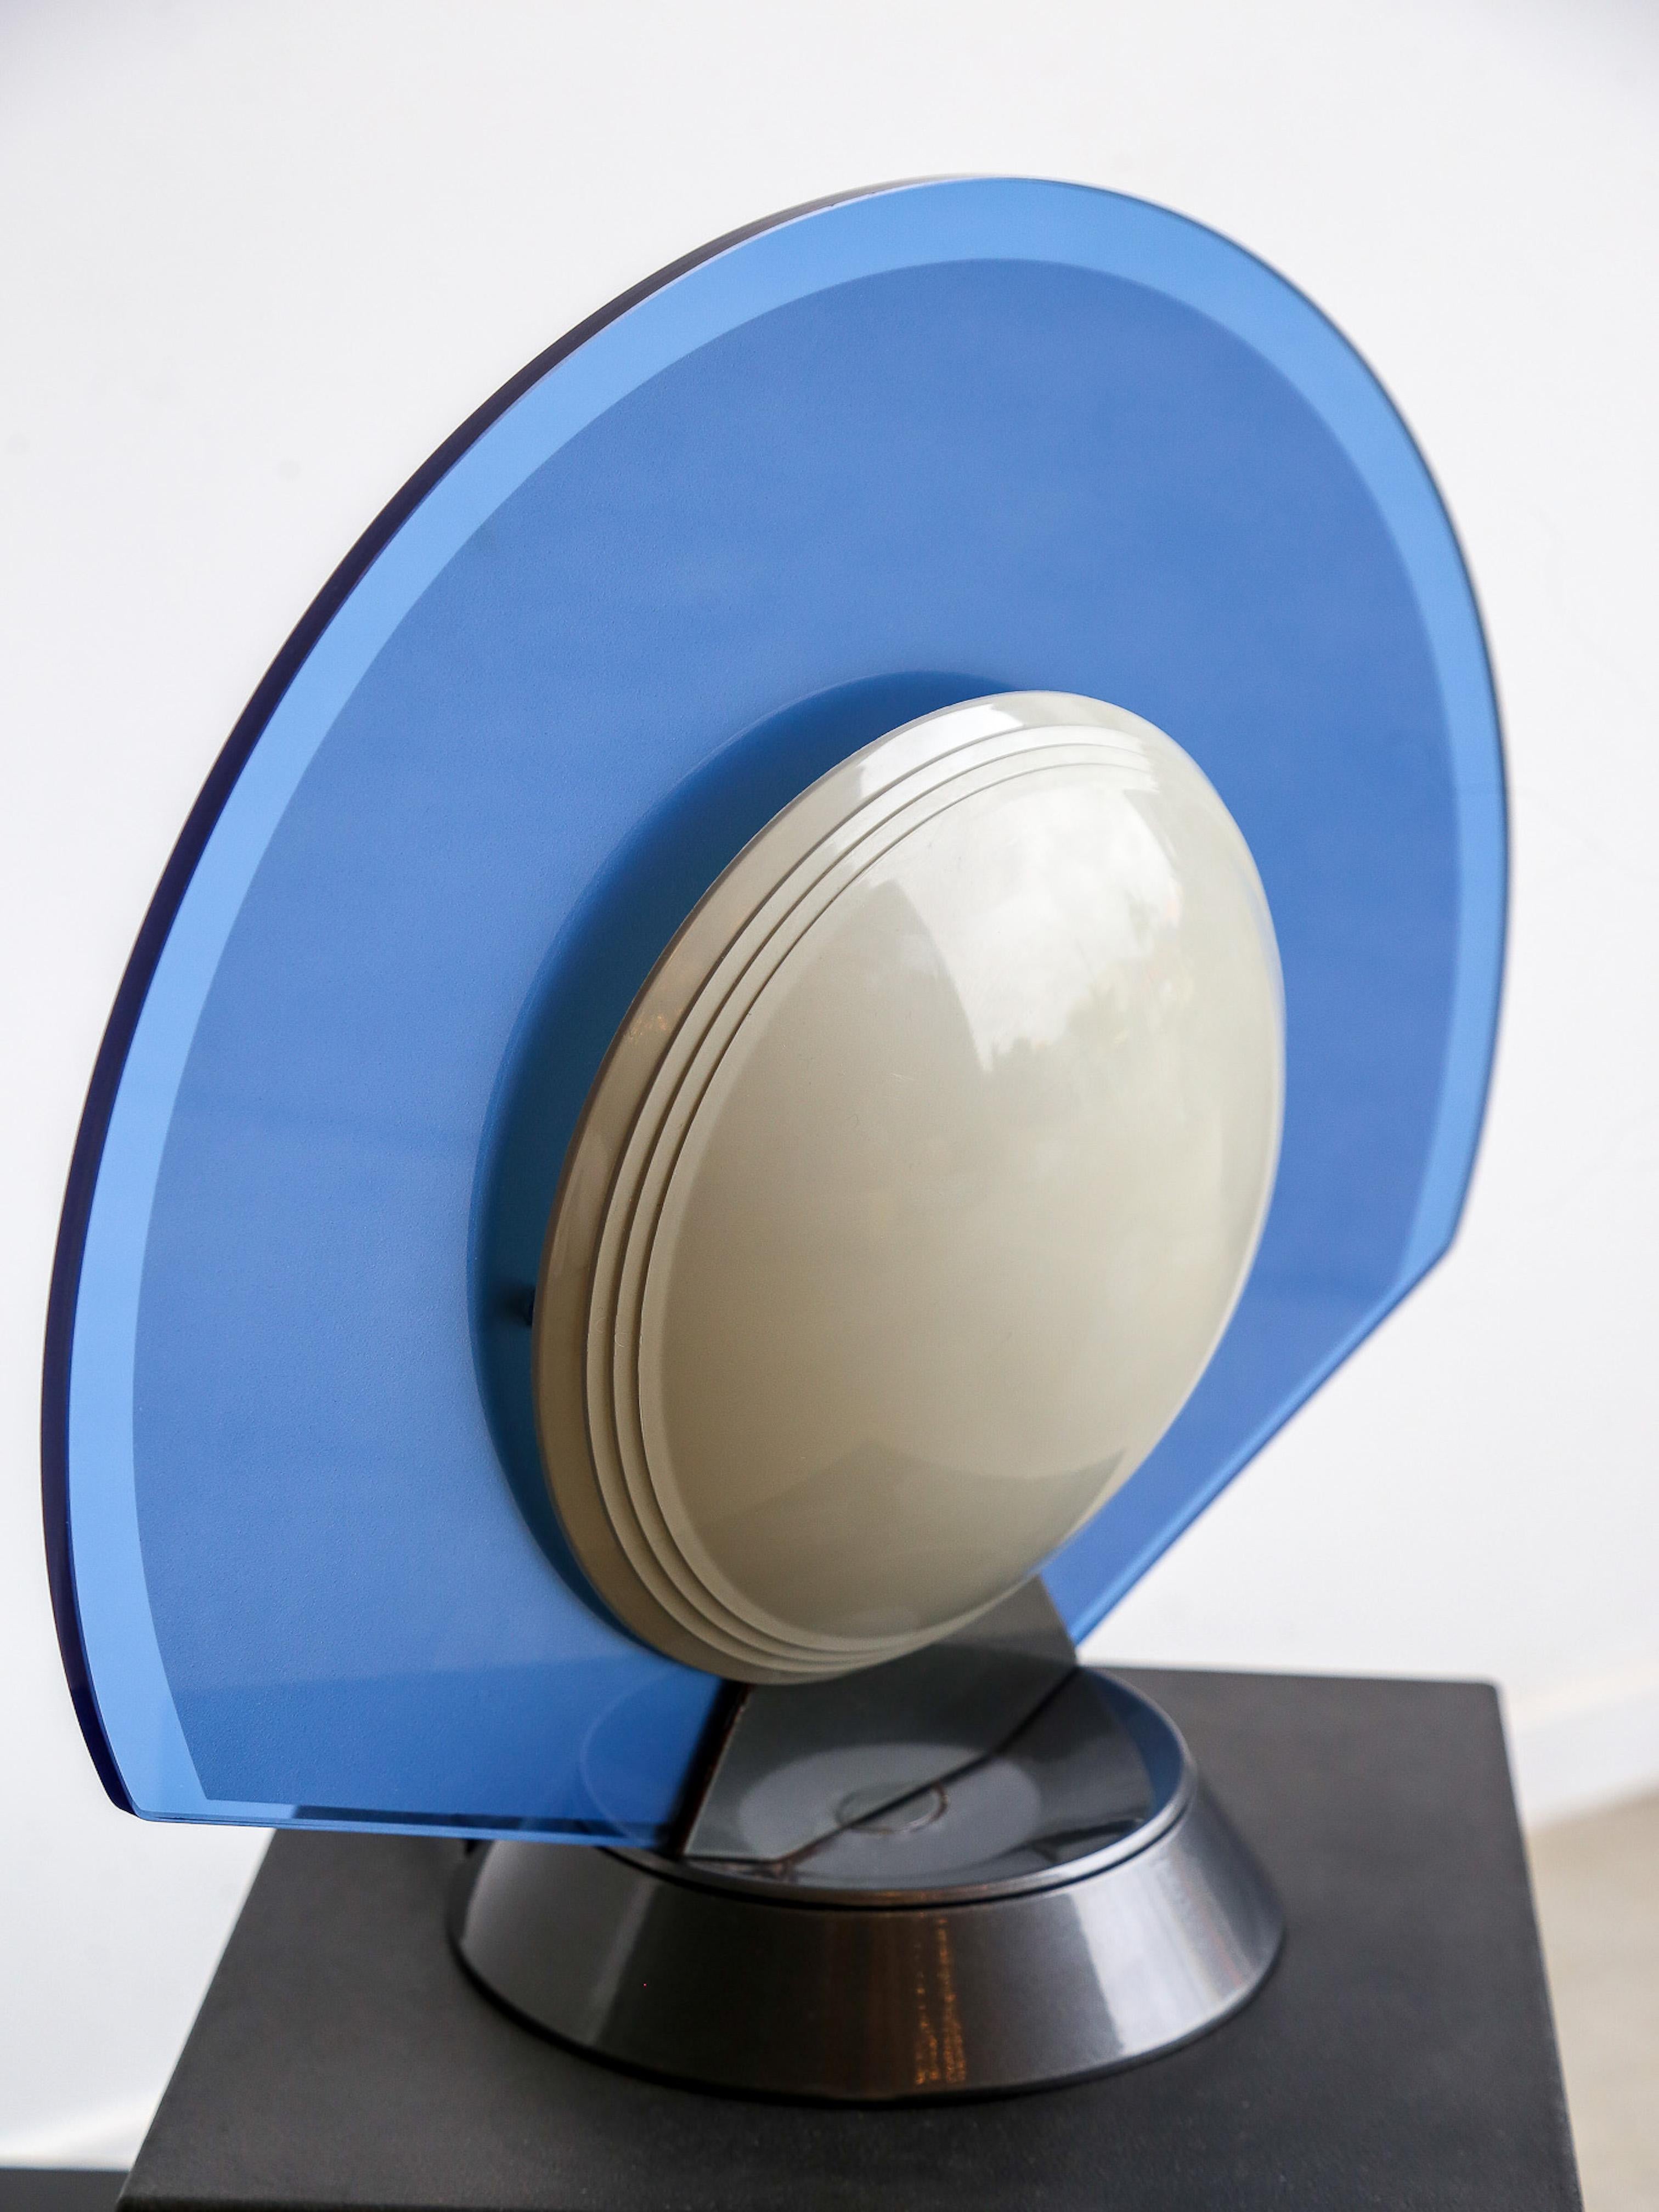 Tikal Table Lamp by Pier Giuseppe Ramella for Arteluce 1980s In Good Condition For Sale In Byron Bay, NSW